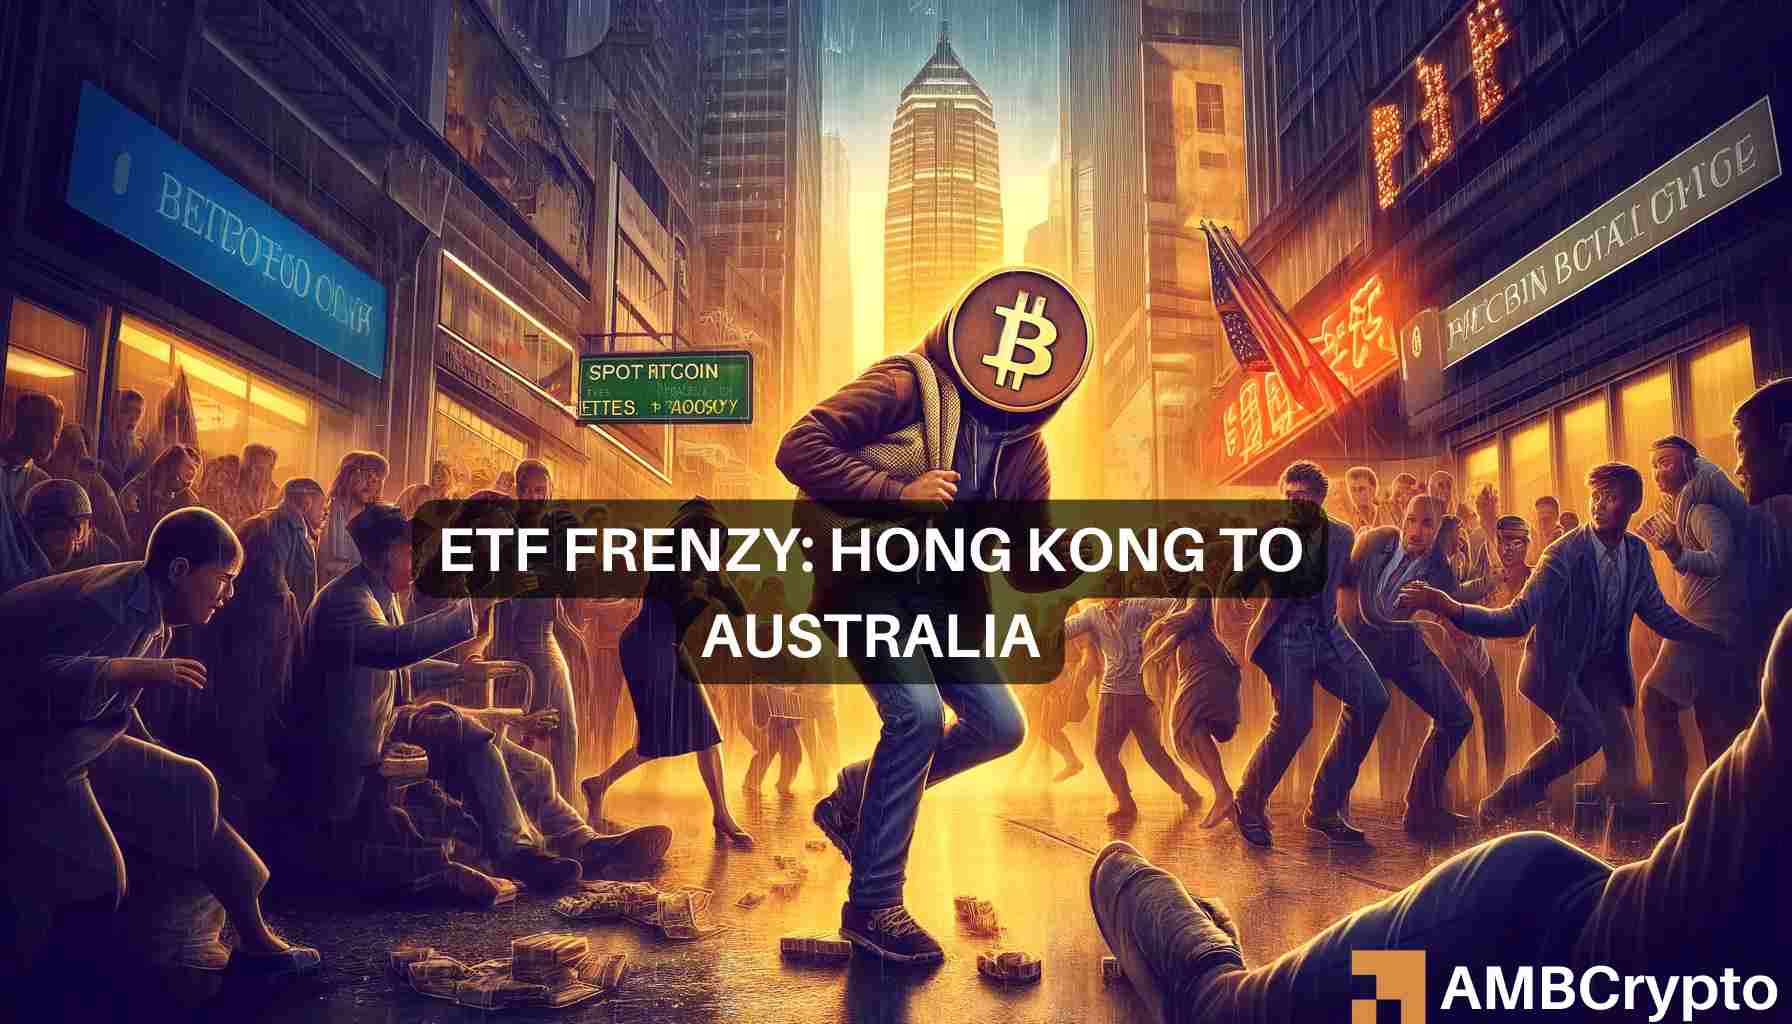 After Hong Kong Bitcoin ETF, Australia joins the party: Will BTC rise again?